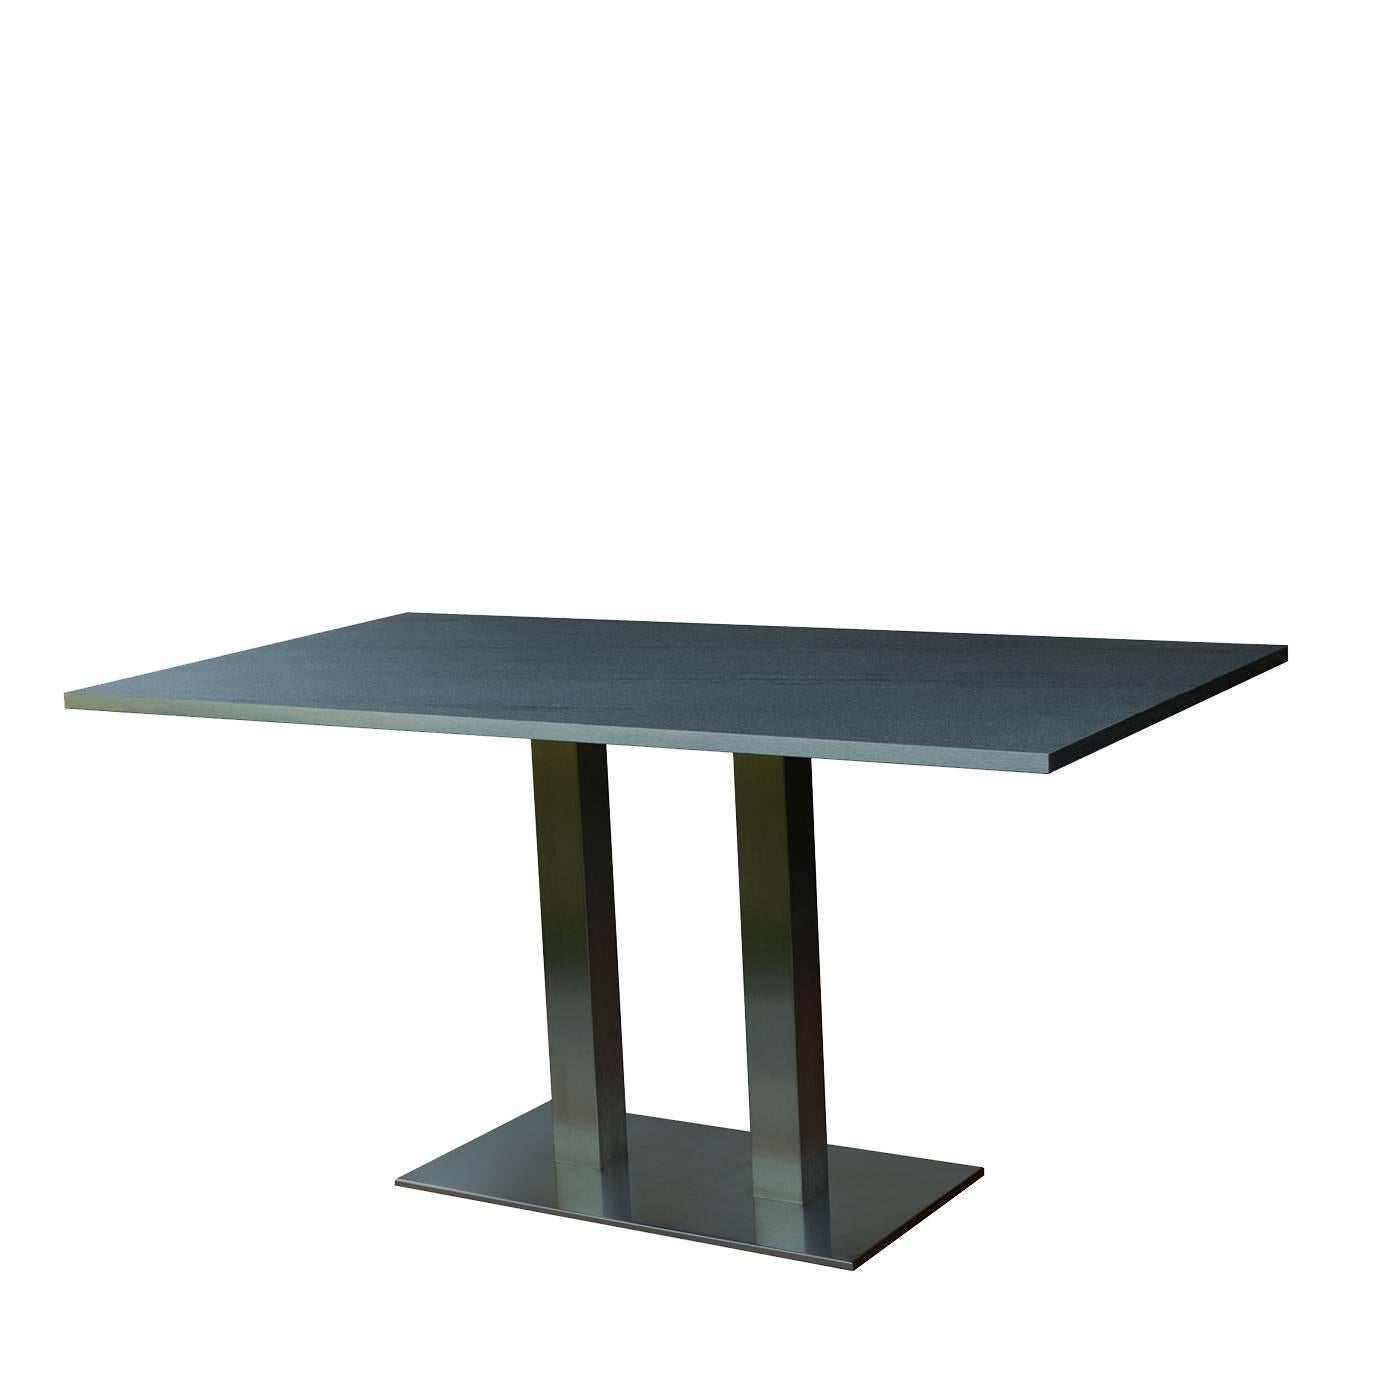 This striking table will be a statement piece for a contemporary decor, thanks to its Minimalist Silhouette and the materials used to craft it. The structure is of steel with a satin finish and comprises a rectangular base with two legs. The top is